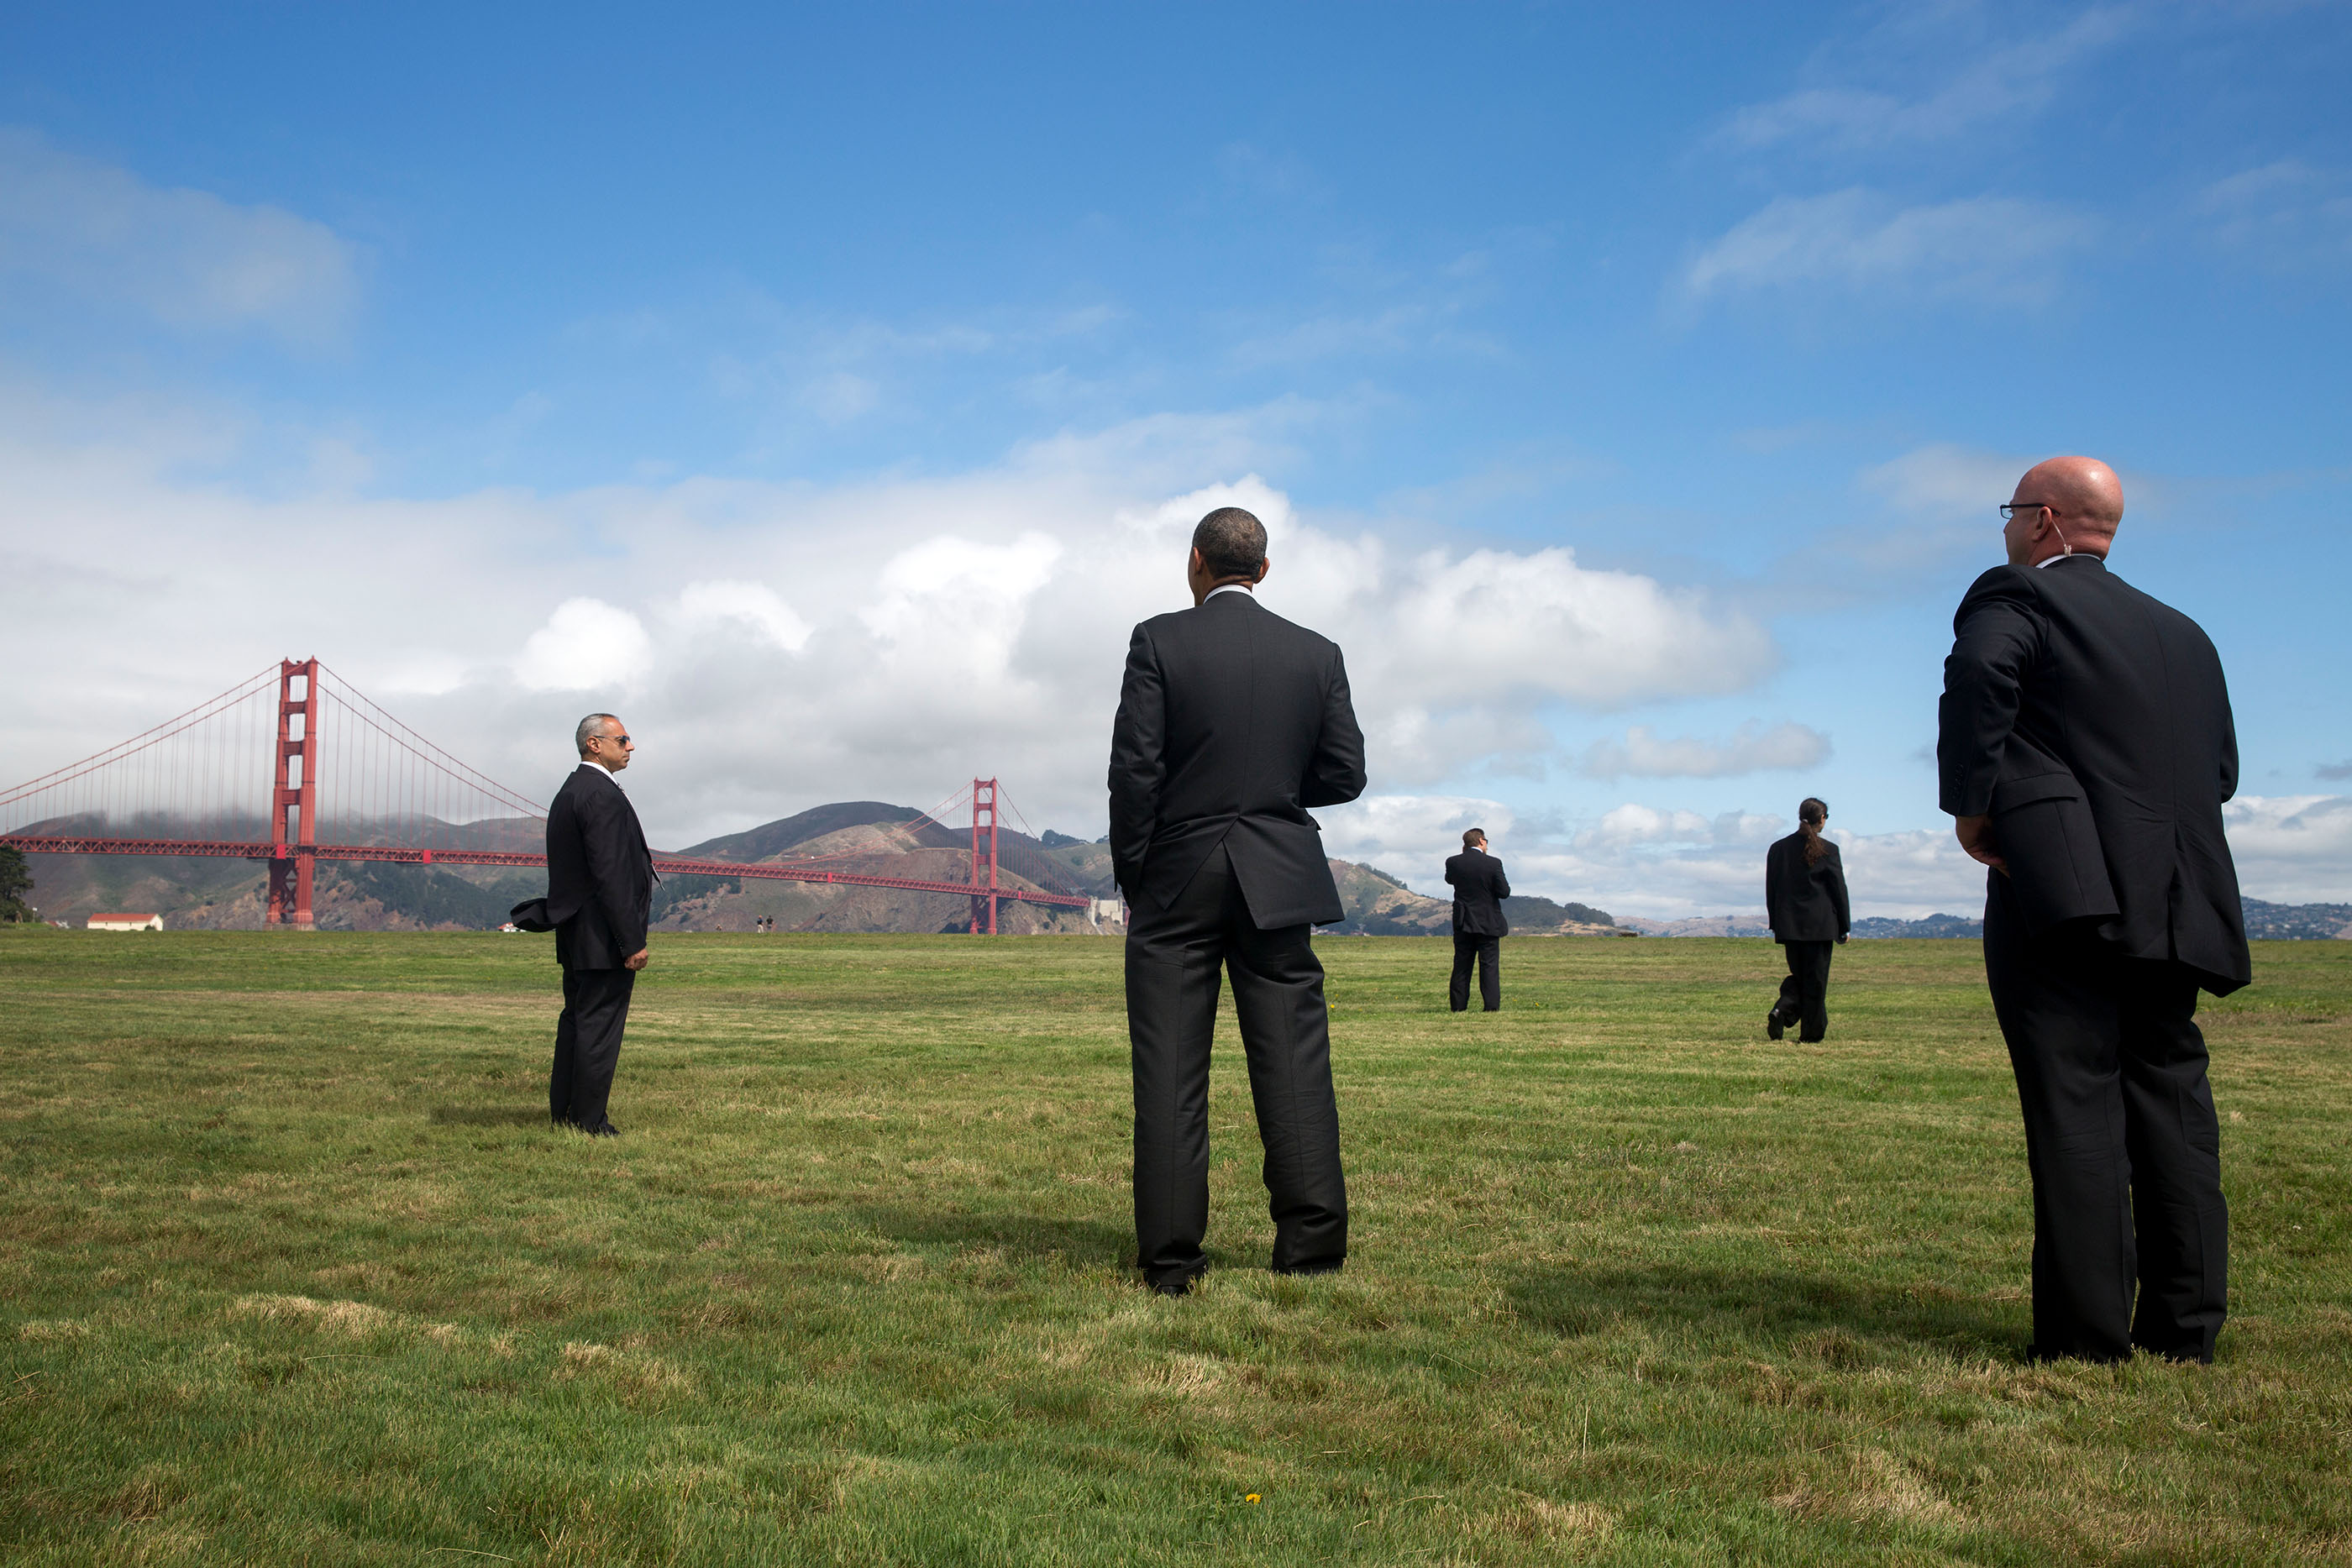 California, July 23, 2014. Viewing the Golden Gate Bridge in San Francisco. (Official White House Photo by Pete Souza)